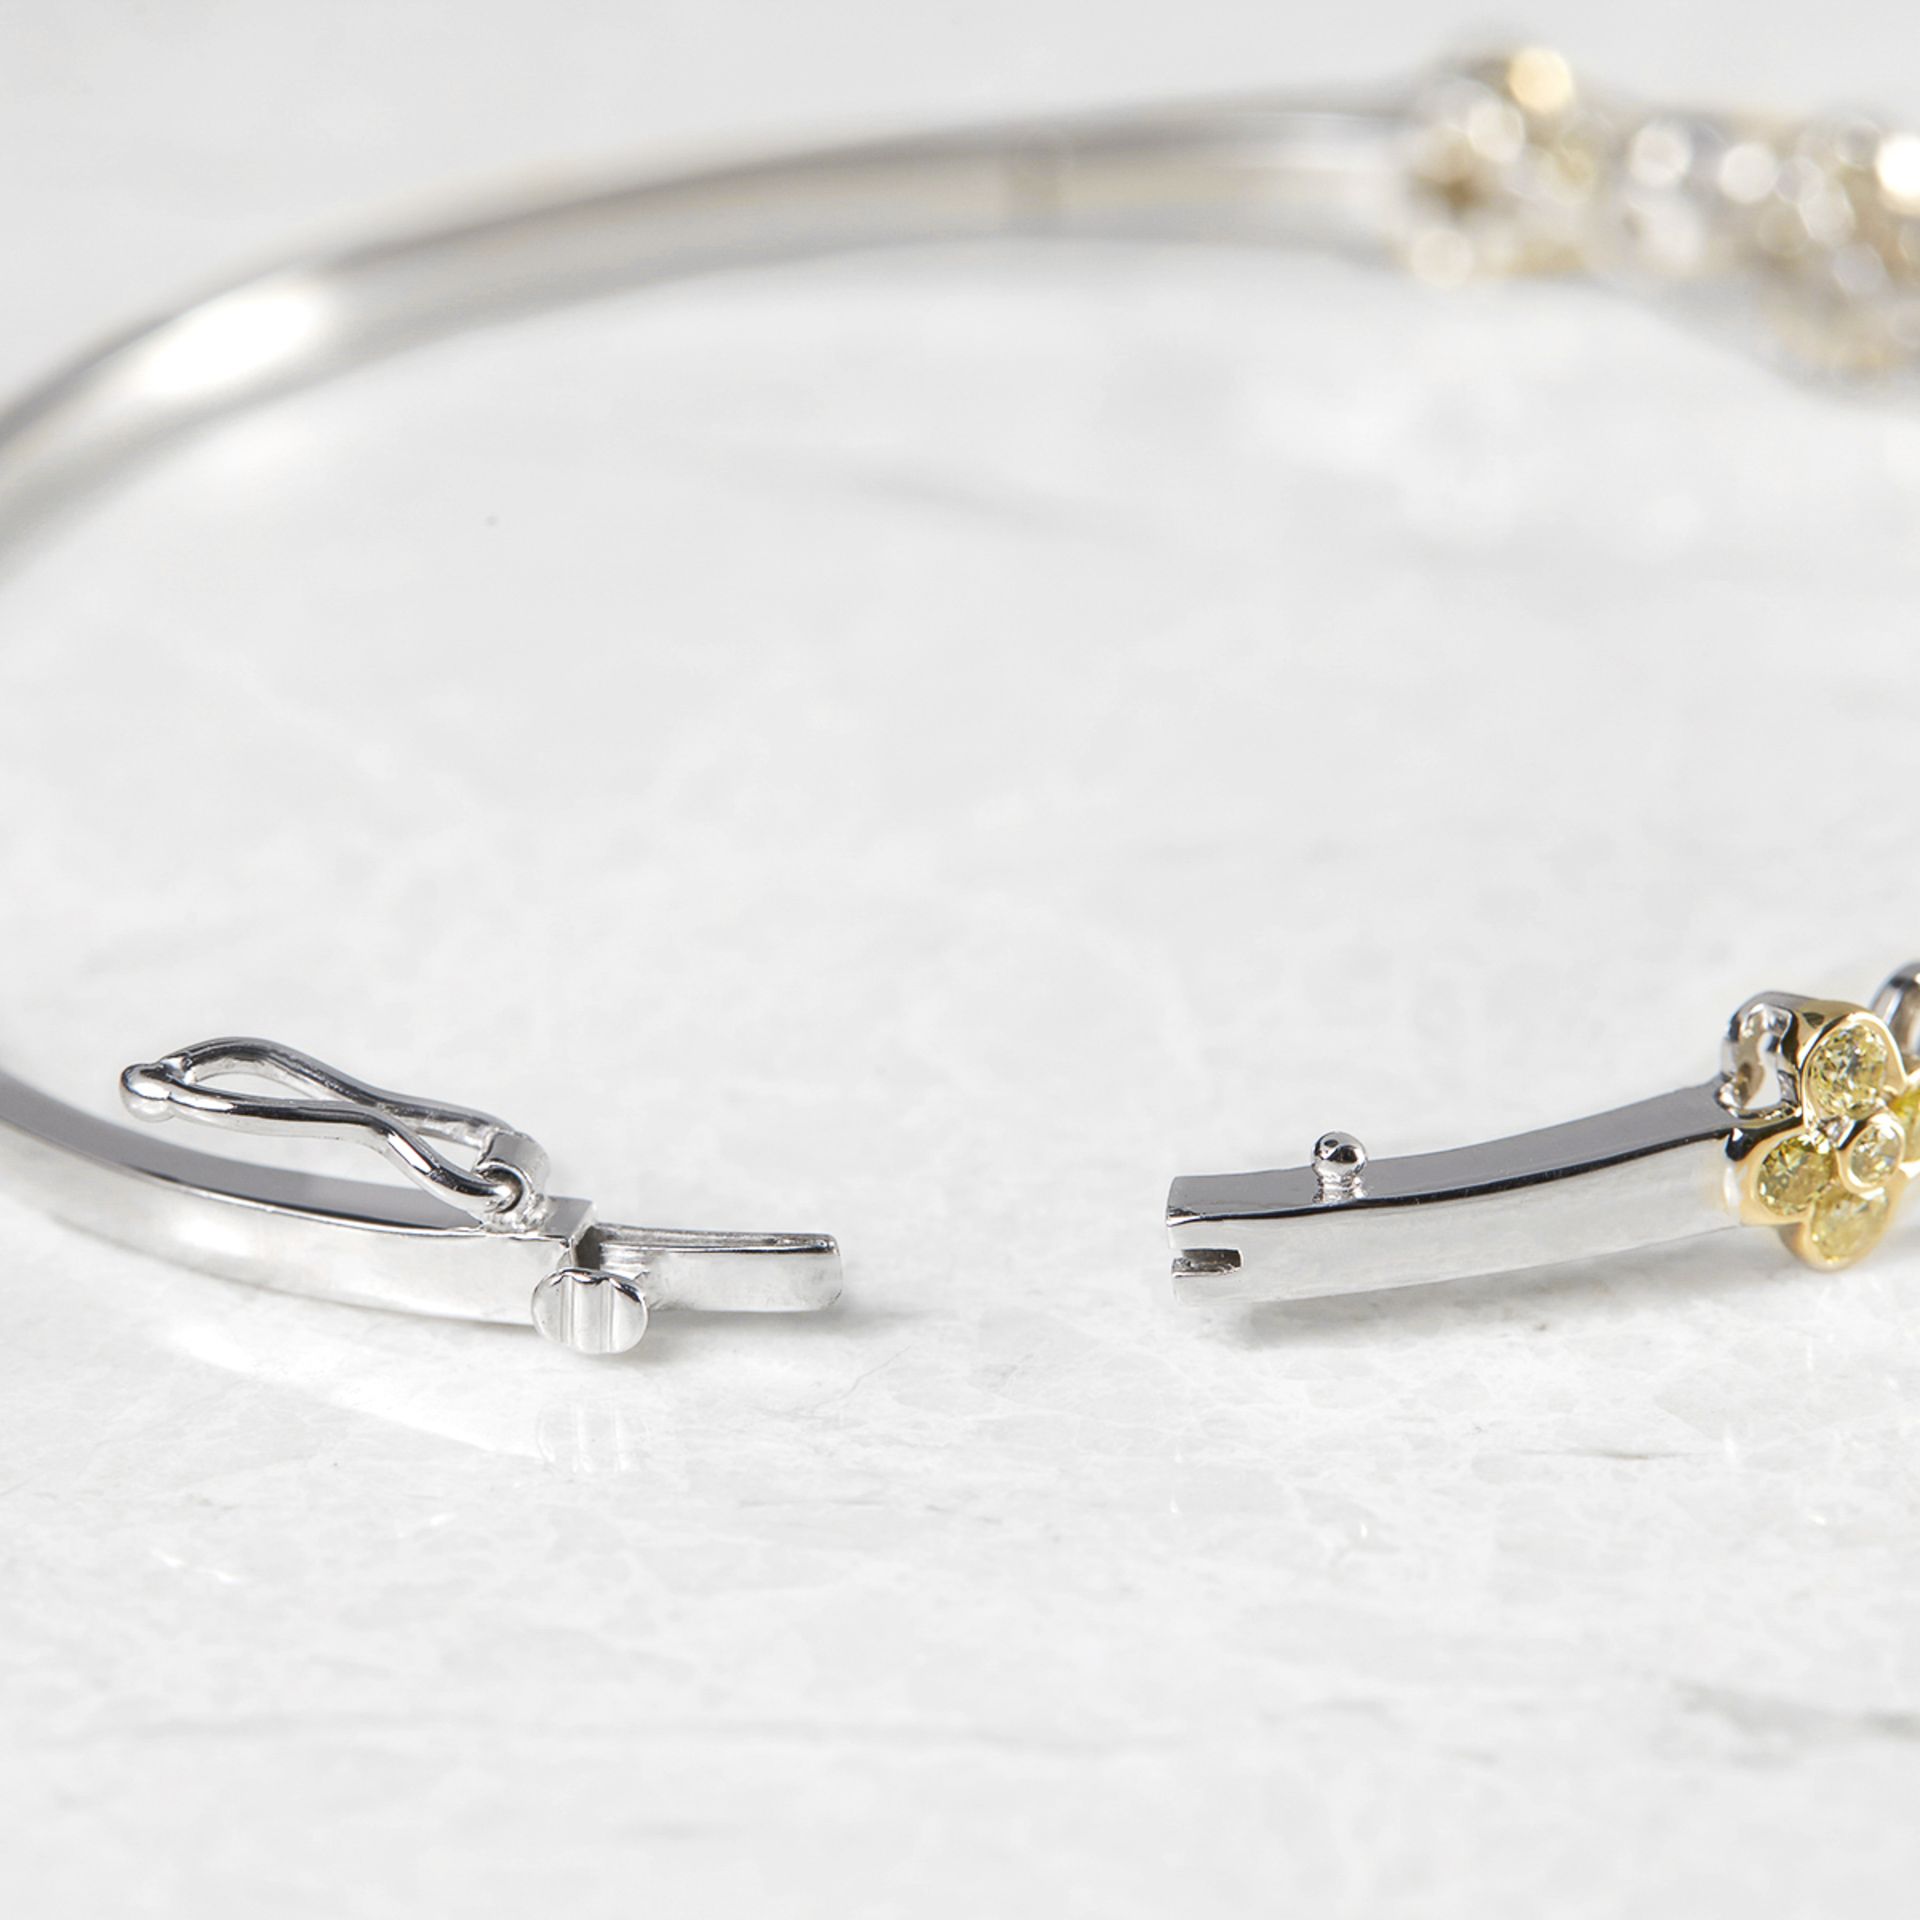 Unbranded, 18k White Gold Fancy Yellow Diamond Floral Bangle - Image 5 of 6